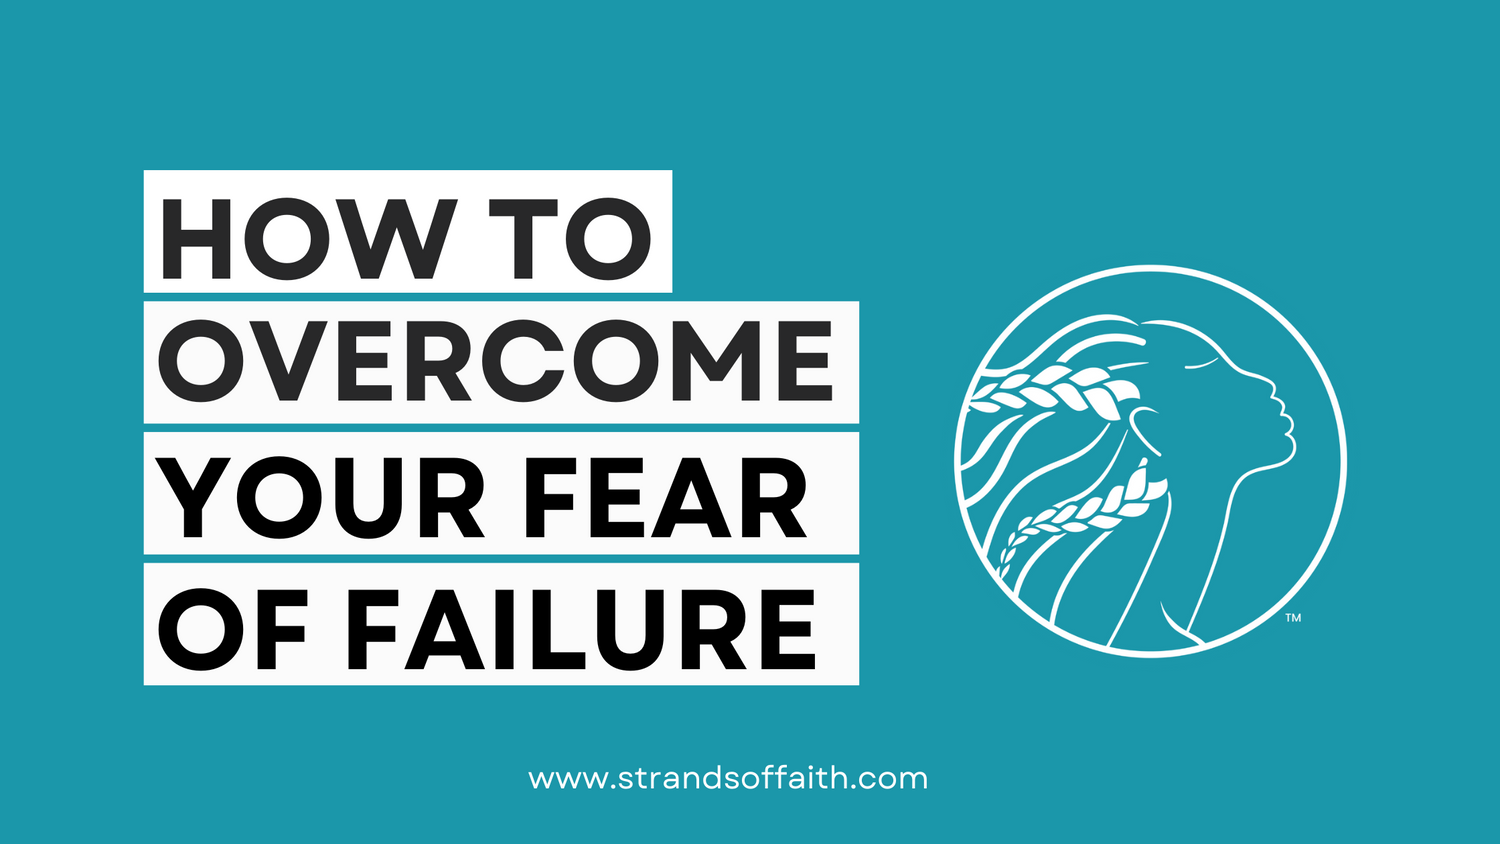 How To Overcome Your Fear Of Failure